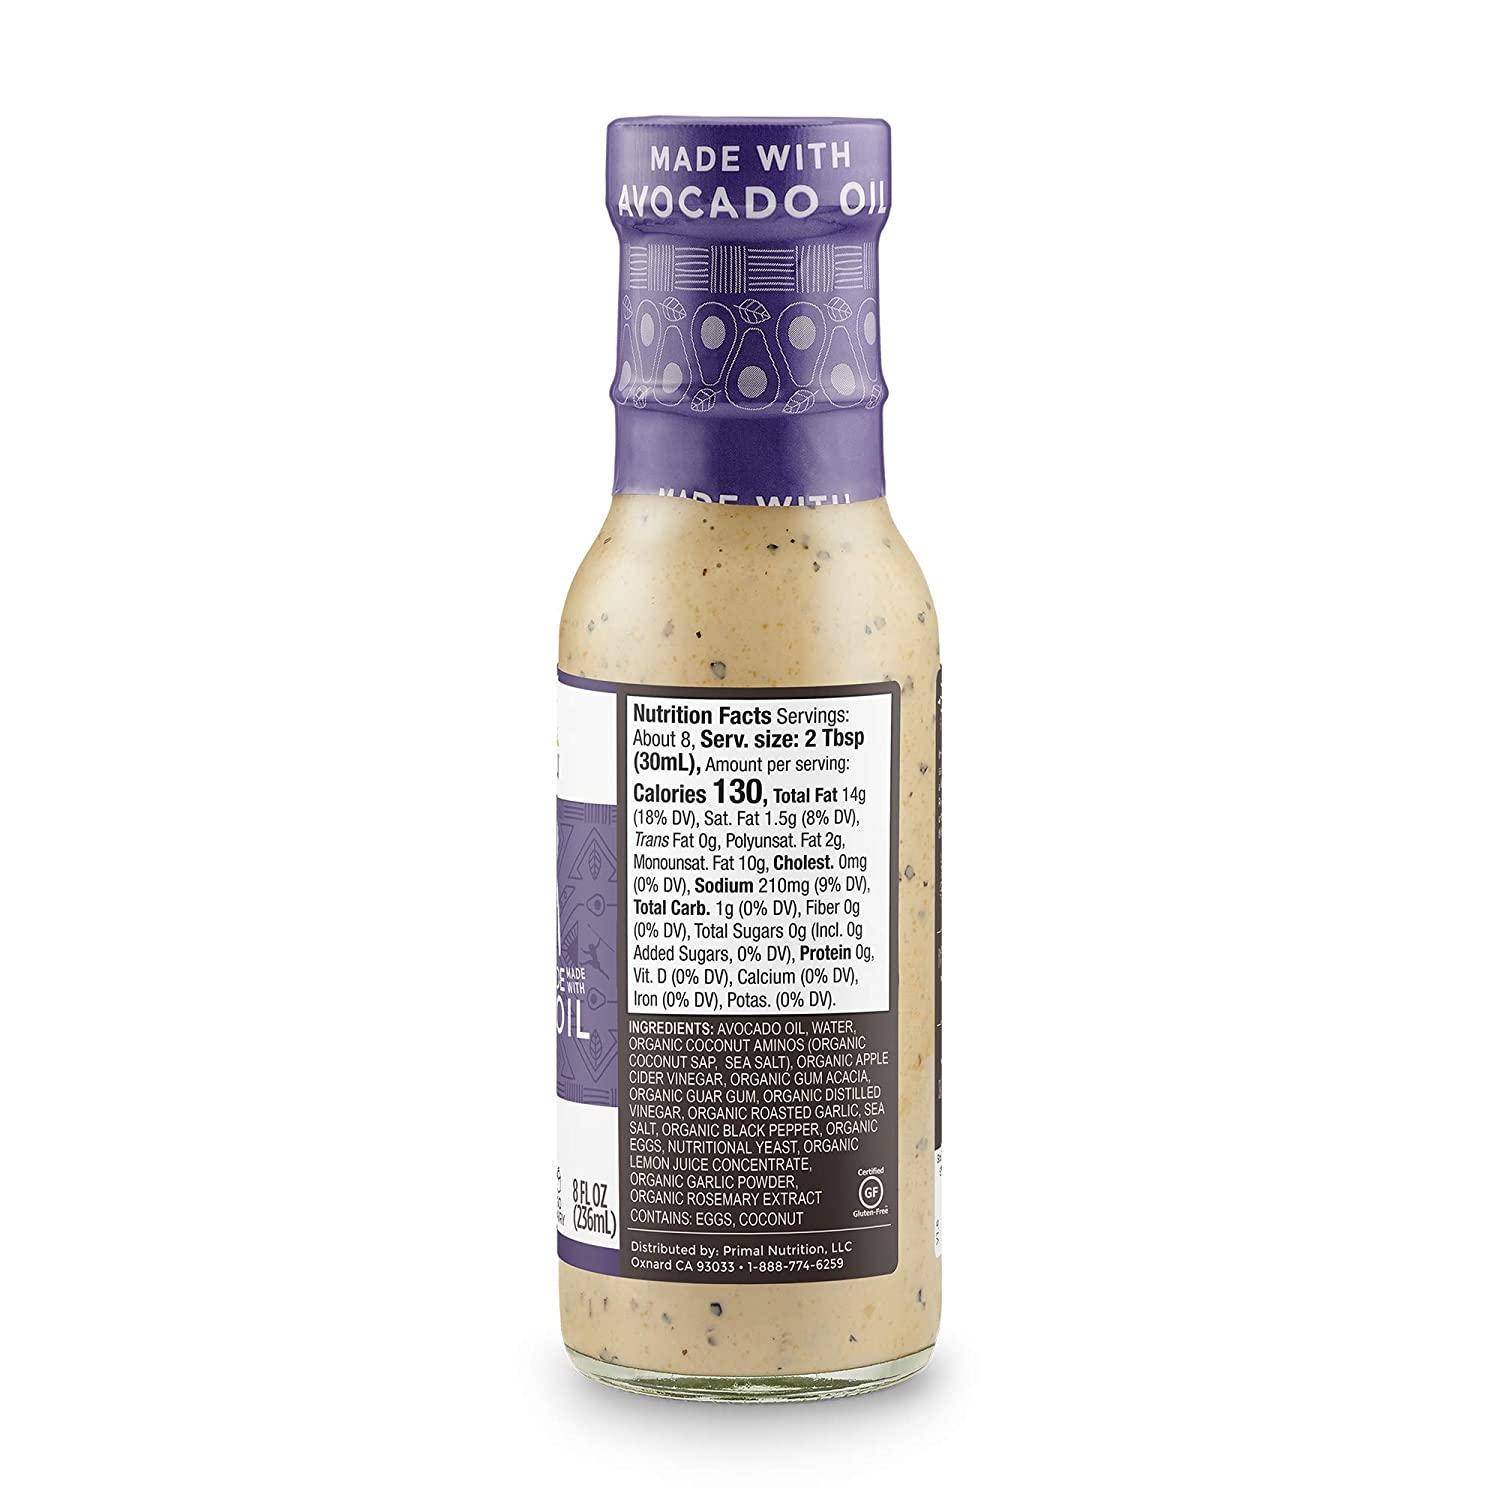 Primal Kitchen Caesar Salad Dressing & Marinade made with Avocado Oil,  Whole30 Approved, Paleo Friendly, and Keto Certified, 8 Fluid Ounces